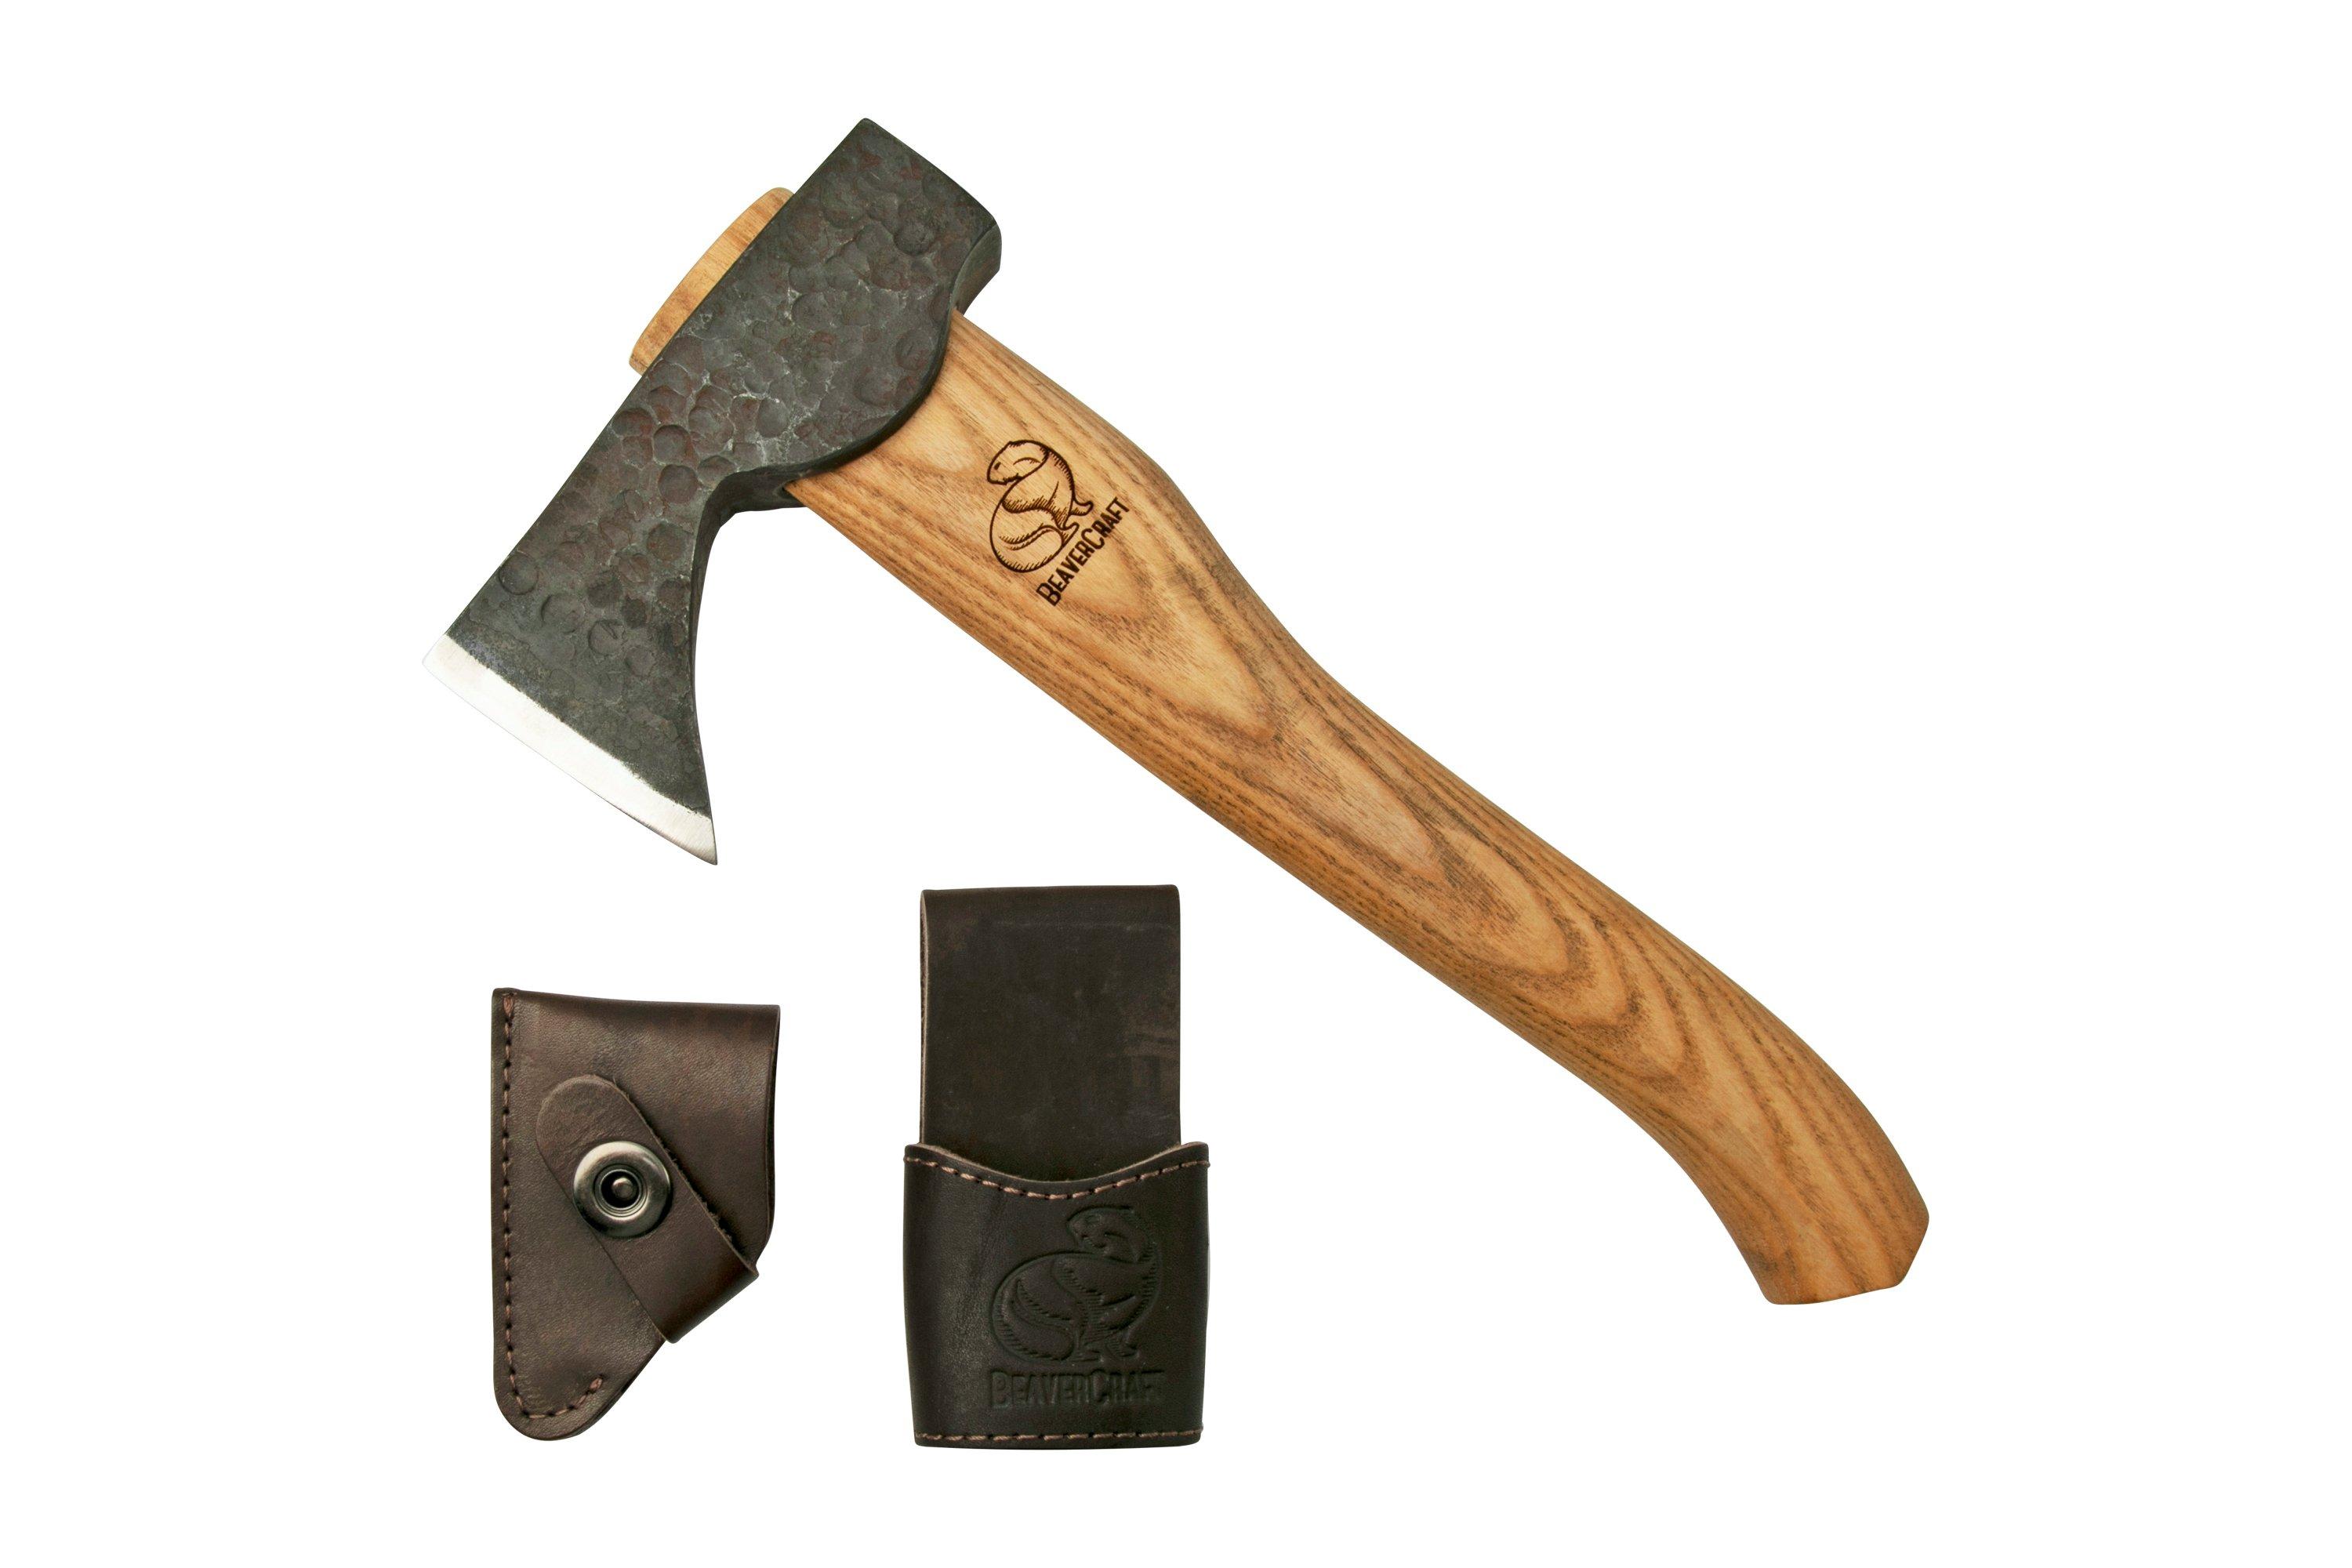 BeaverCraft Small Carving Axe with Leather Sheath